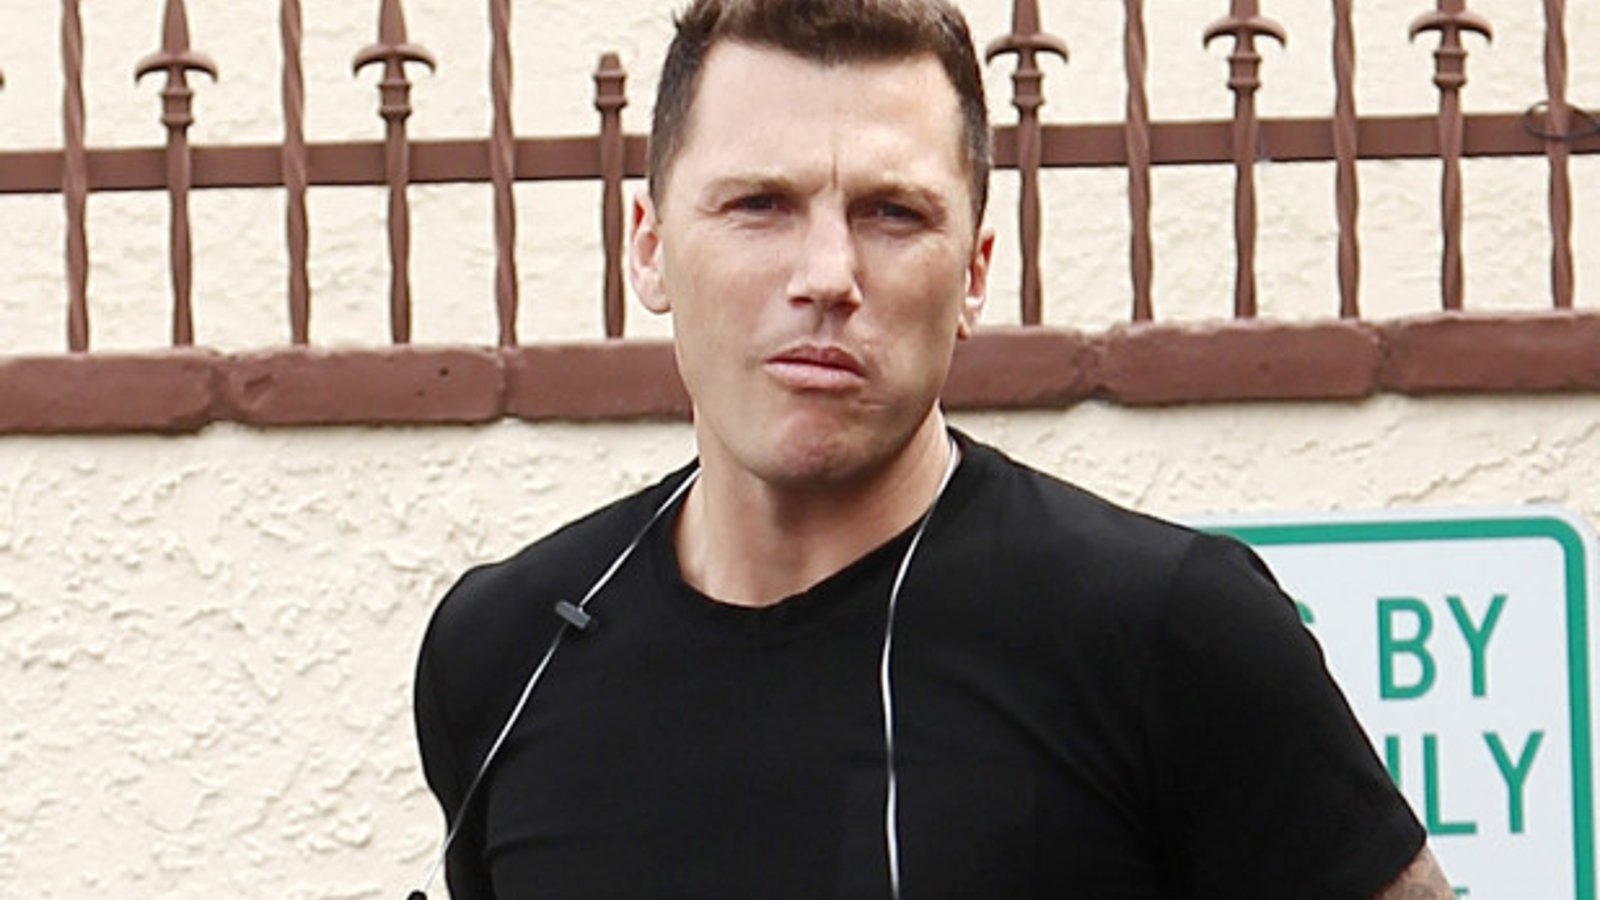 Sean Avery runs man’s family out of business following social media feud 